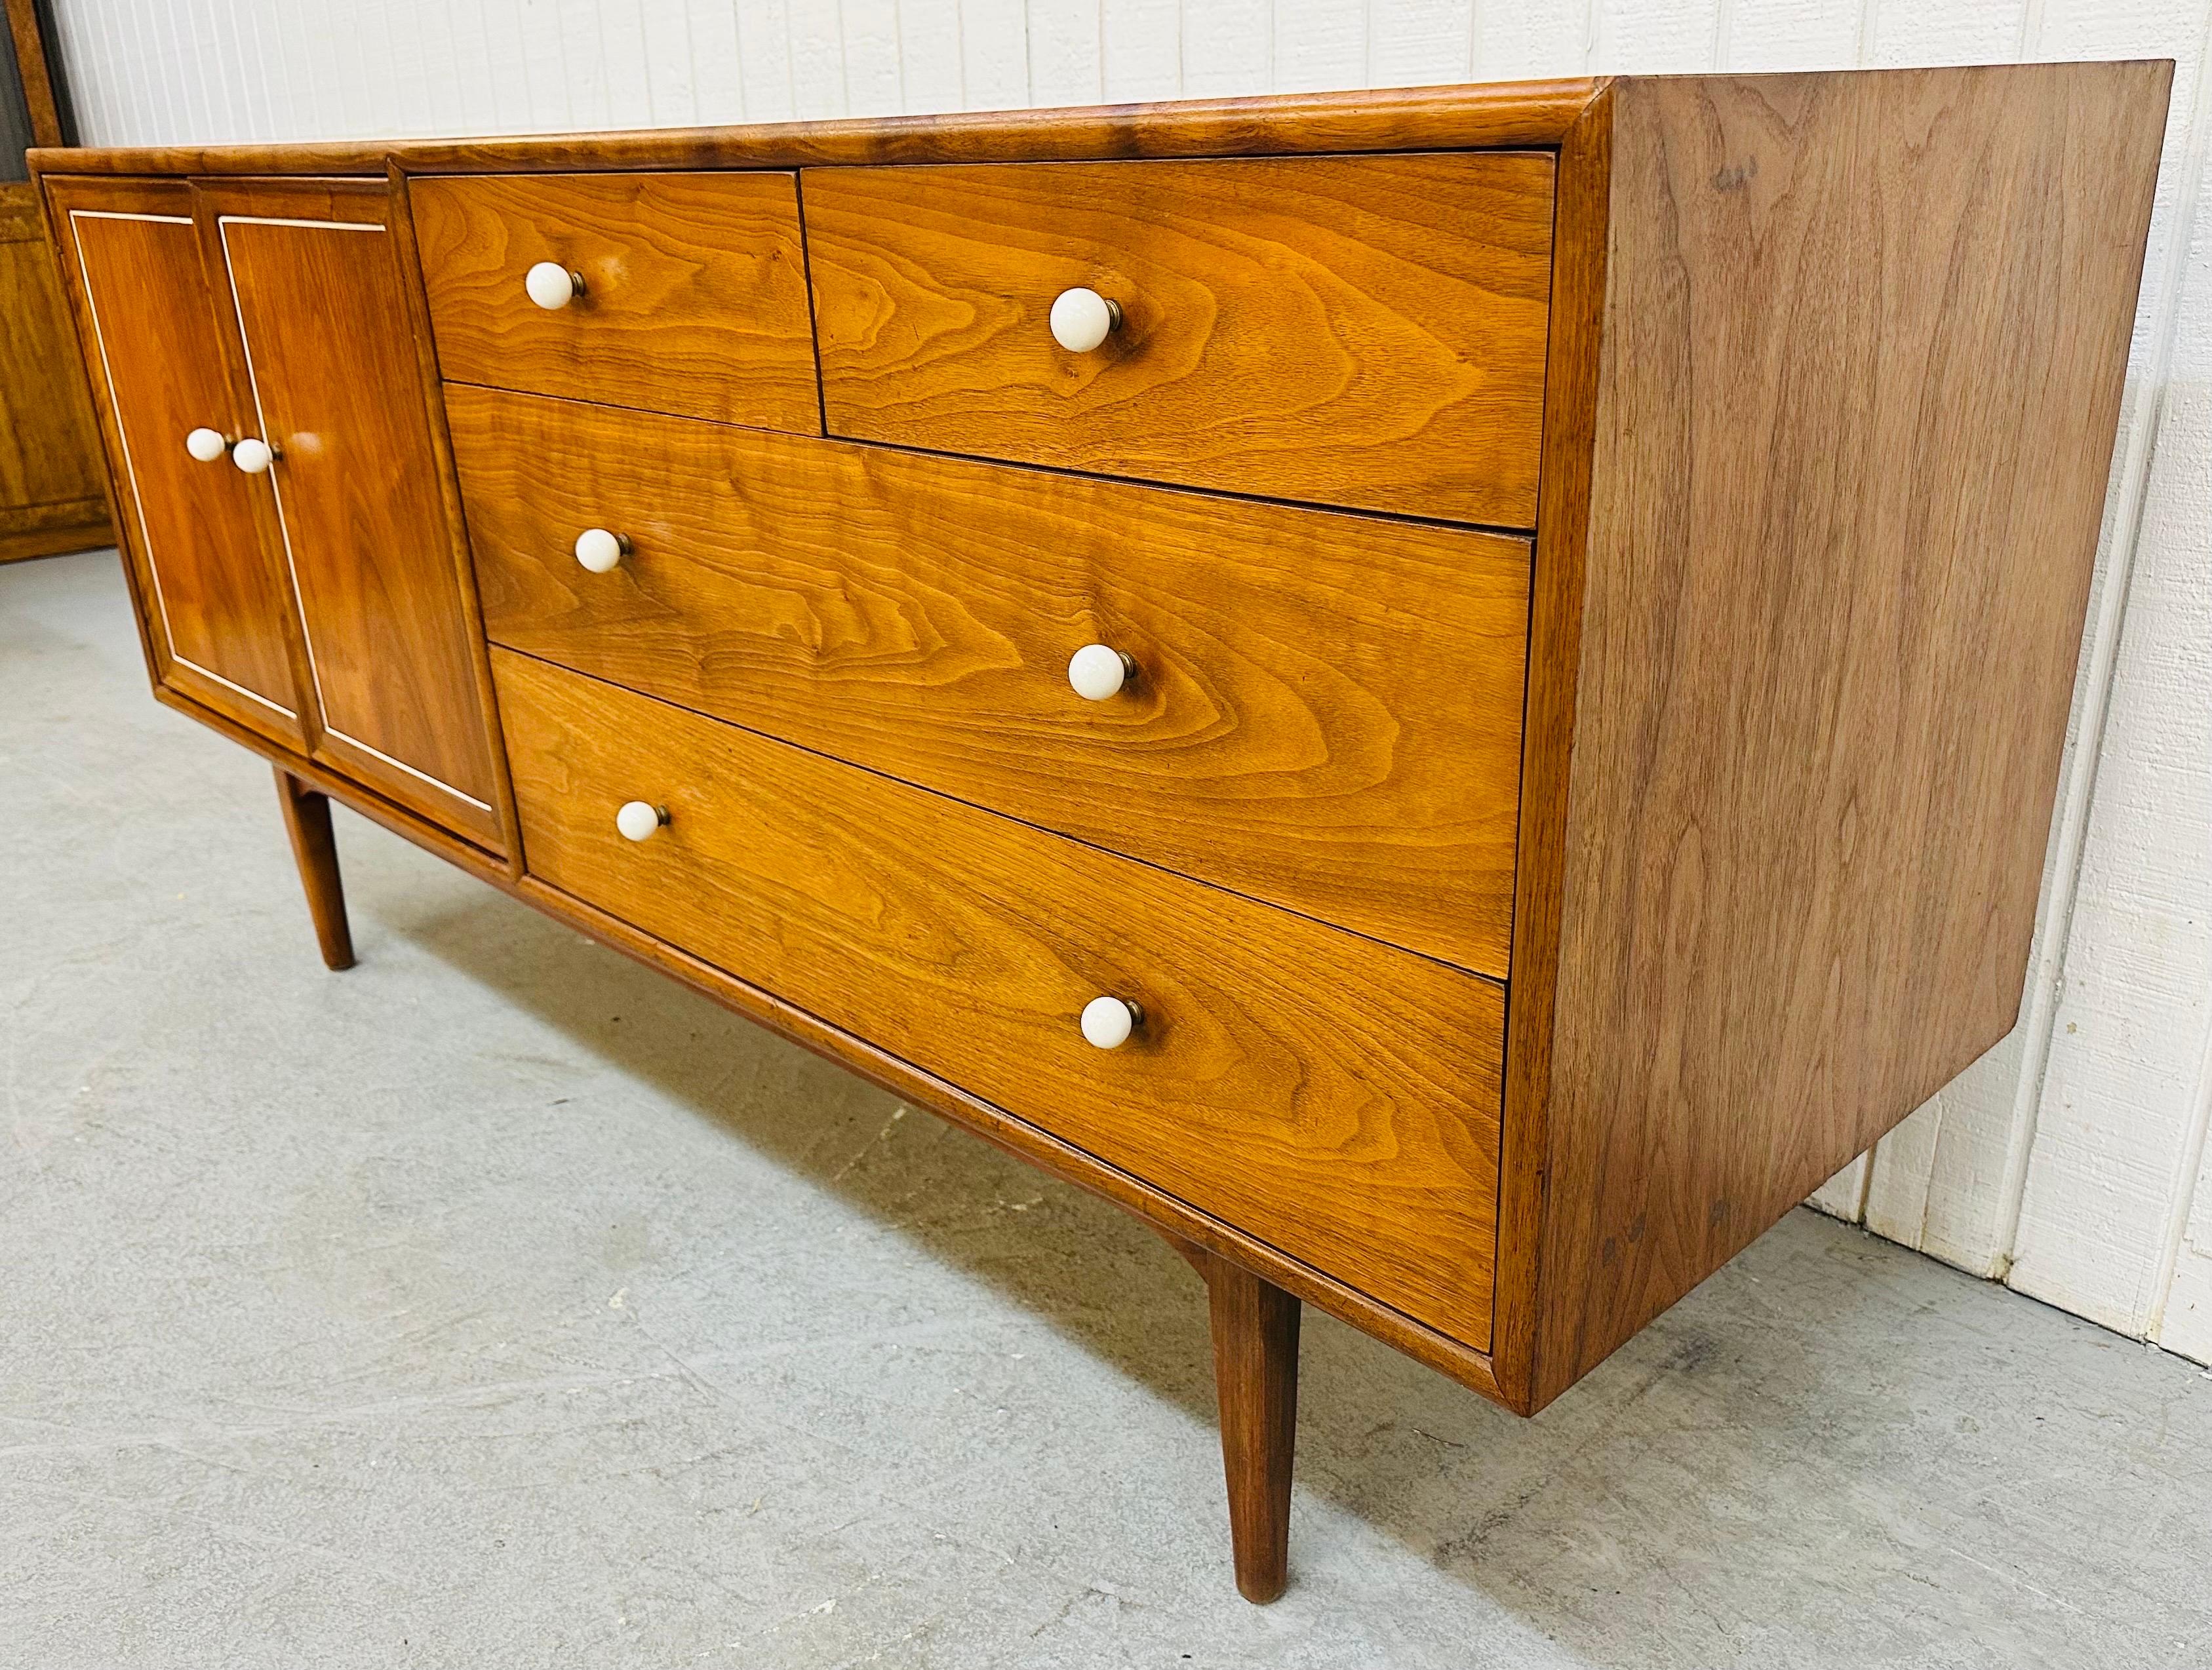 Declaration Walnut 10-Drawer Dresser. Featuring four standard drawers on the right side, two doors that push open to reveal six small hidden drawers, original milk glass knobs, a white pin stripe on each door, and a beautiful walnut finish. This is